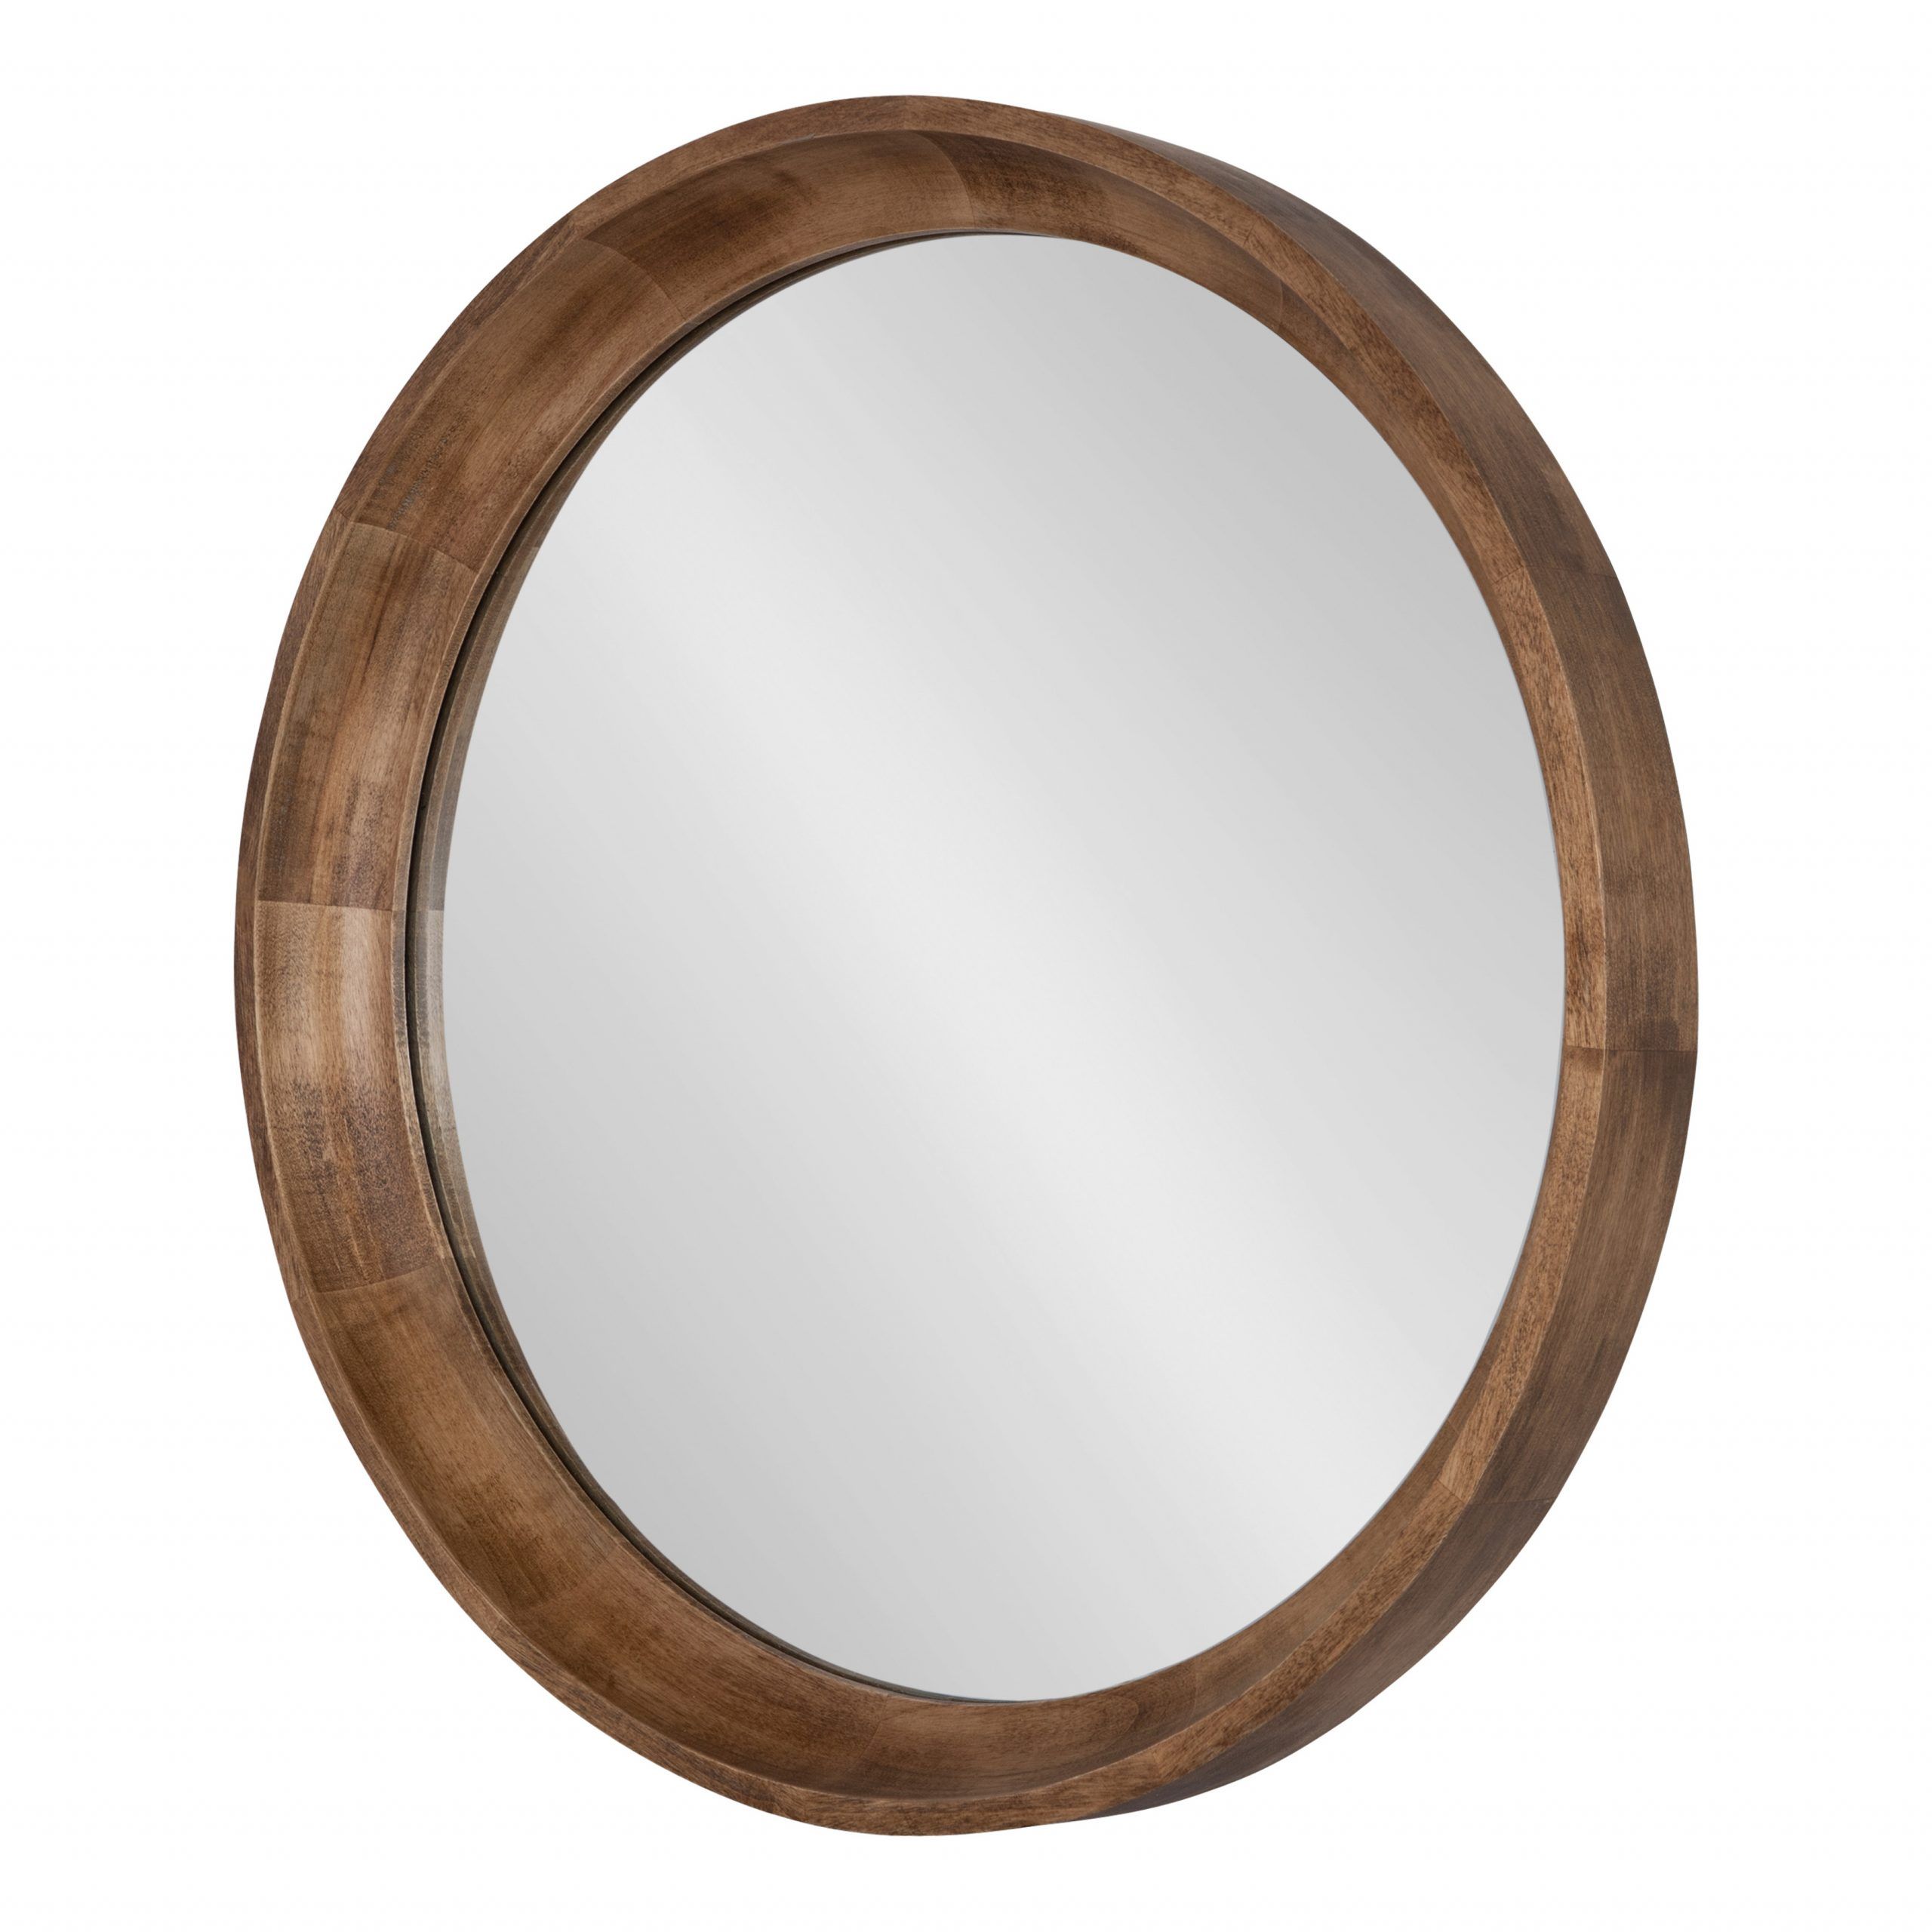 Preferred Kate And Laurel Colfax Round Wood Mirror, 22" Diameter, Natural Wood Throughout Wood Rounded Side Rectangular Wall Mirrors (View 1 of 15)